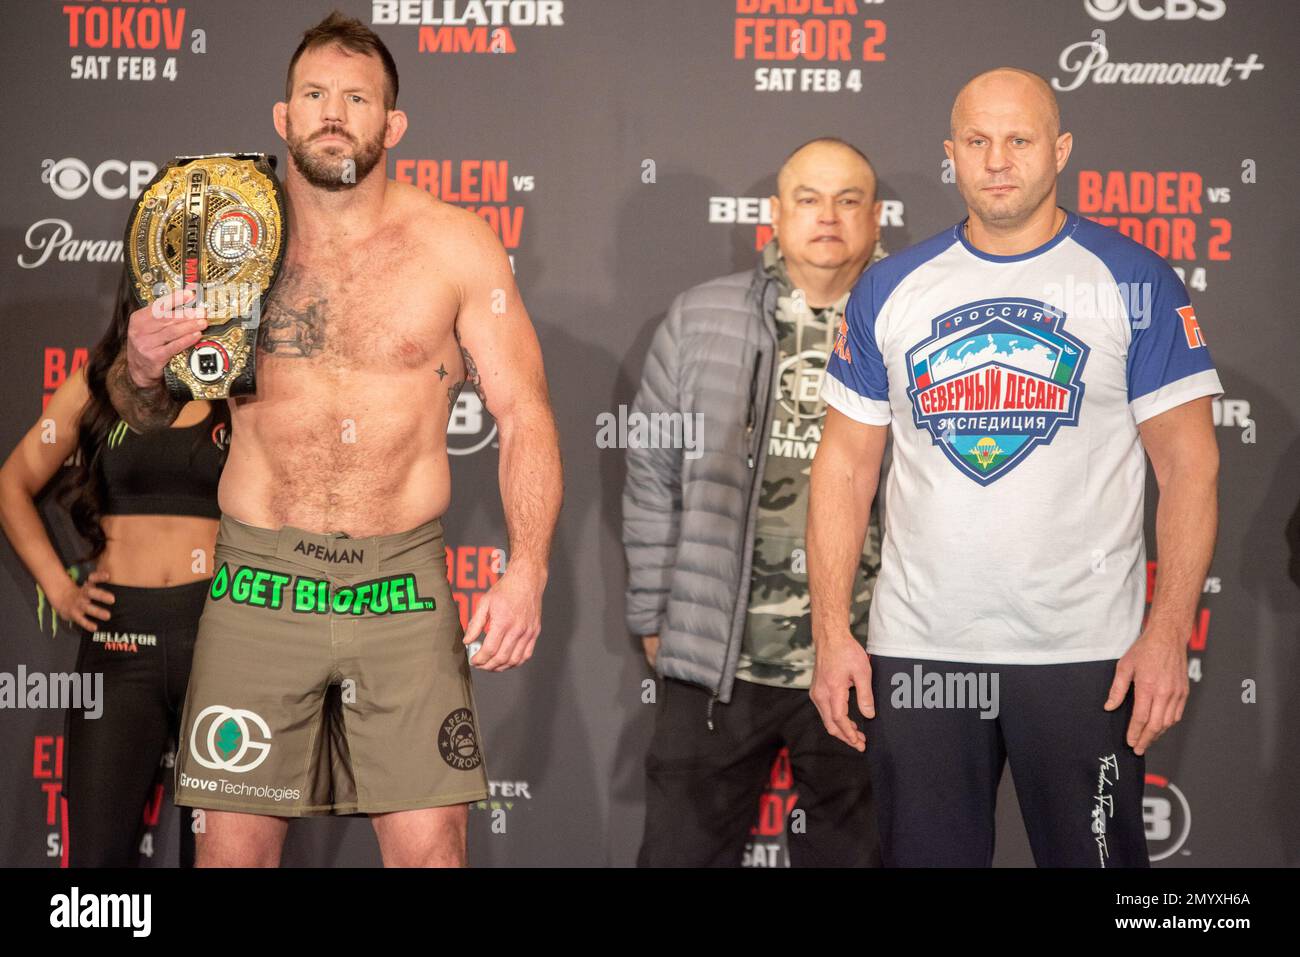 Los Angeles, California - February 3nd: Ryan Bader and Fedor Emelianenko Face Off ahead of their Heavyweight Title fight at Bellator 290 Bader vs Fedor 2 at The Forum on February 4th, 2023 in Los Angeles, California, United States. (Photo by Matt Davies) Credit: Px Images/Alamy Live News Stock Photo